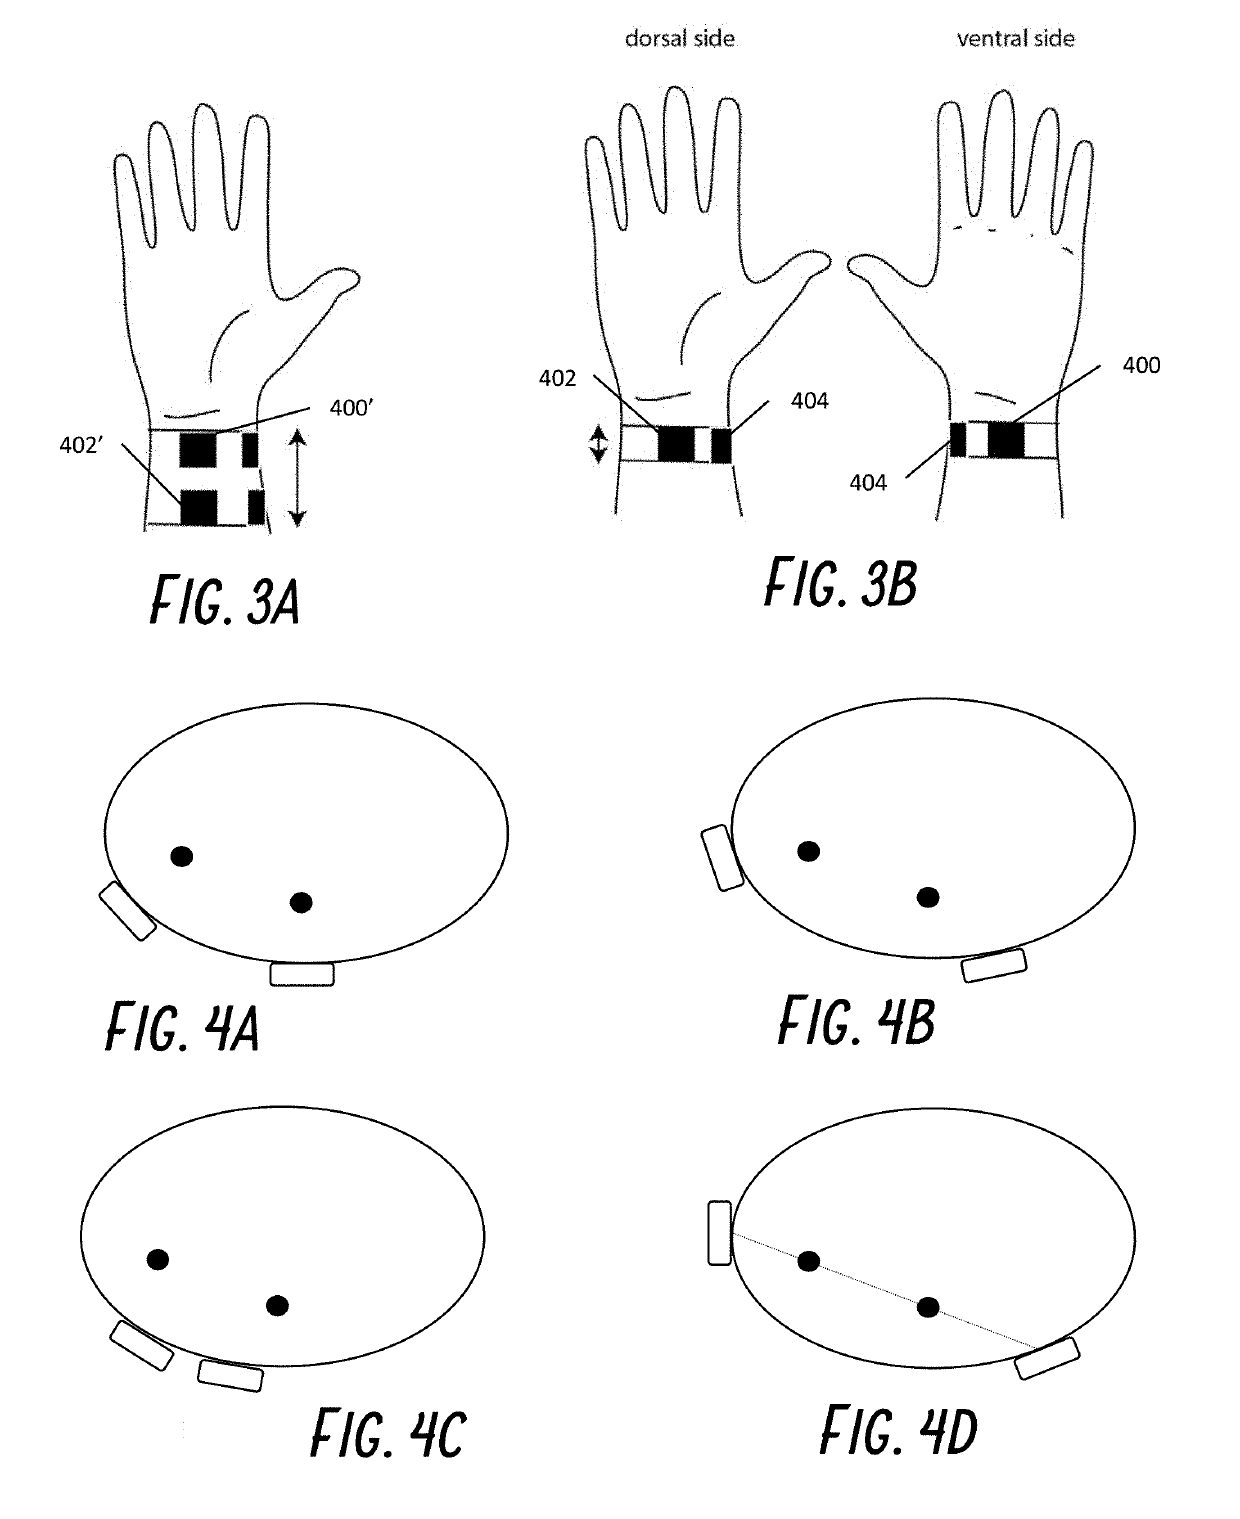 Dry electrodes for transcutaneous nerve stimulation